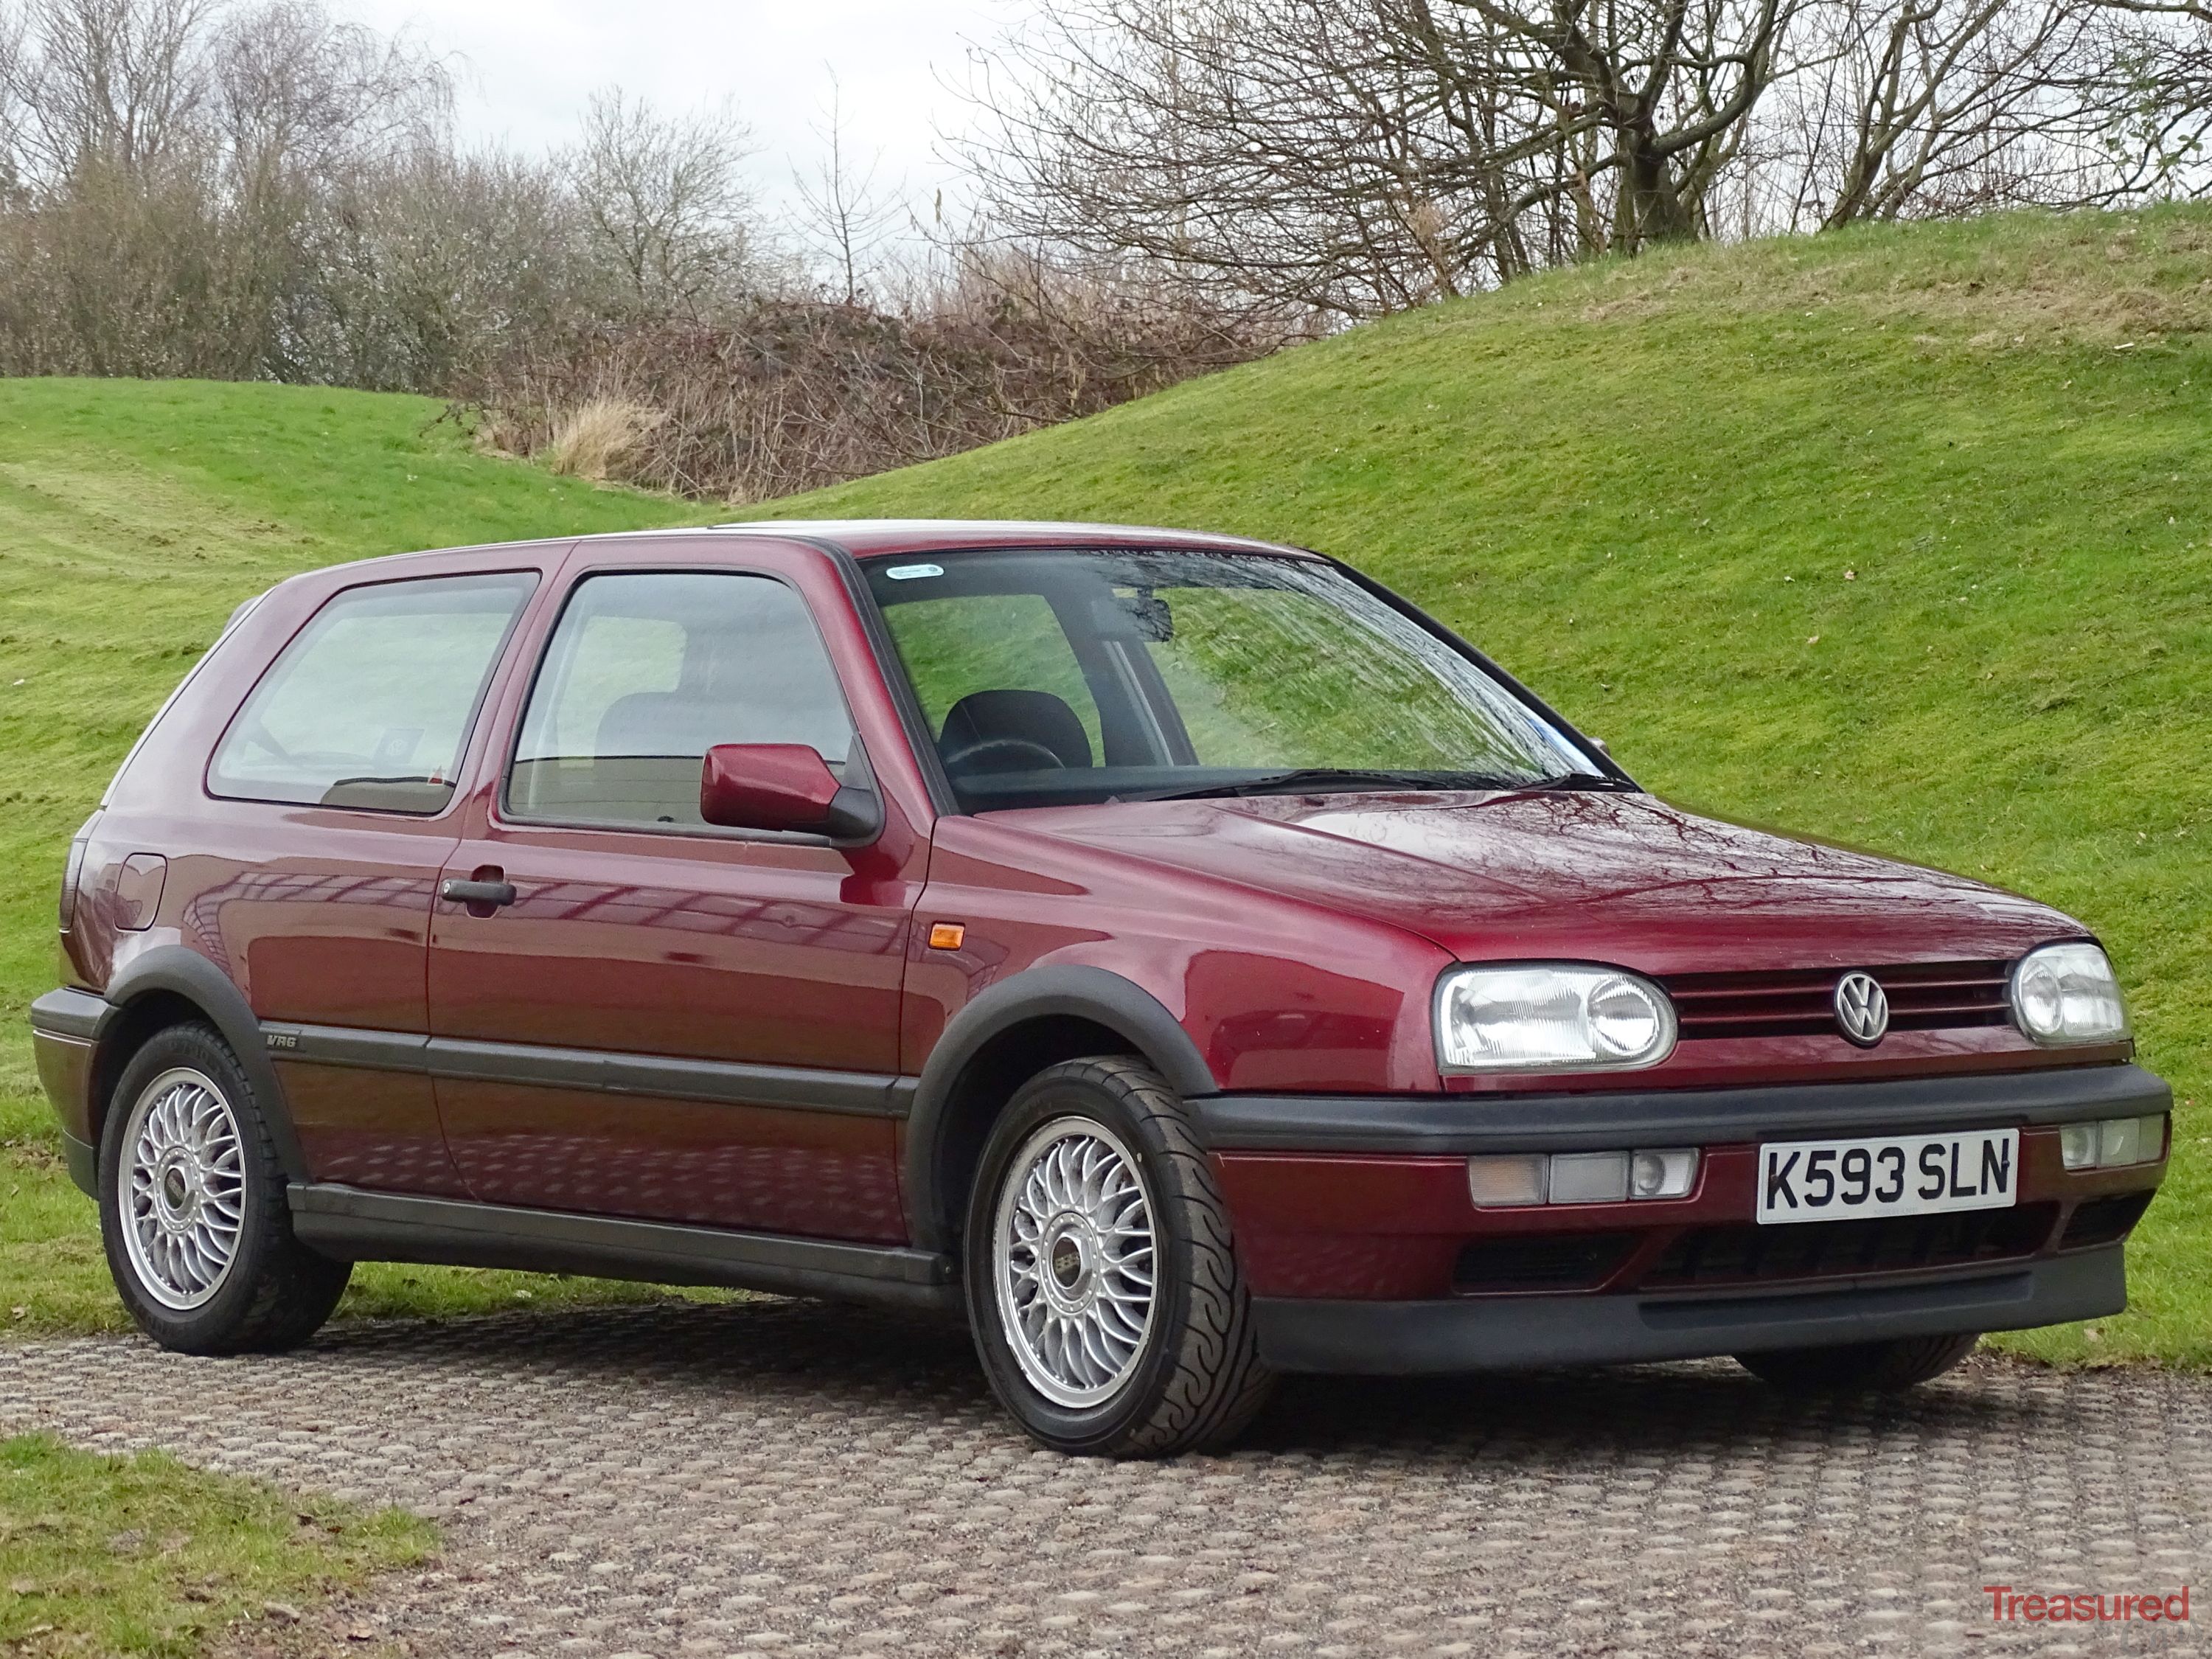 1993 Volkswagen Golf VR6 Classic Cars for sale - Treasured Cars